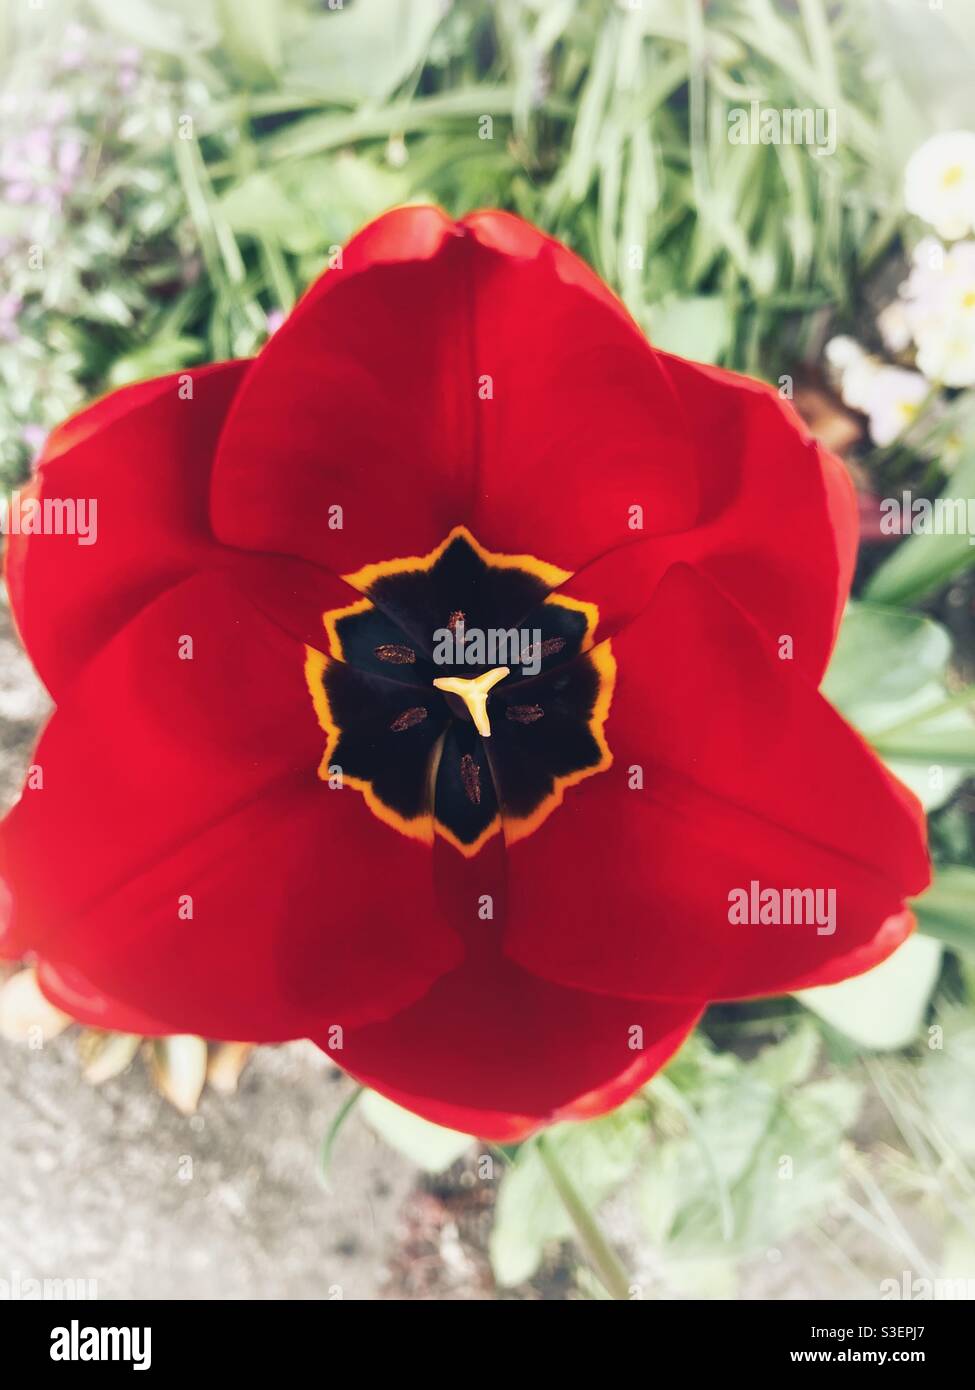 Close up of the inside of a red tulip from directly above showing red petals/ tepals Stock Photo